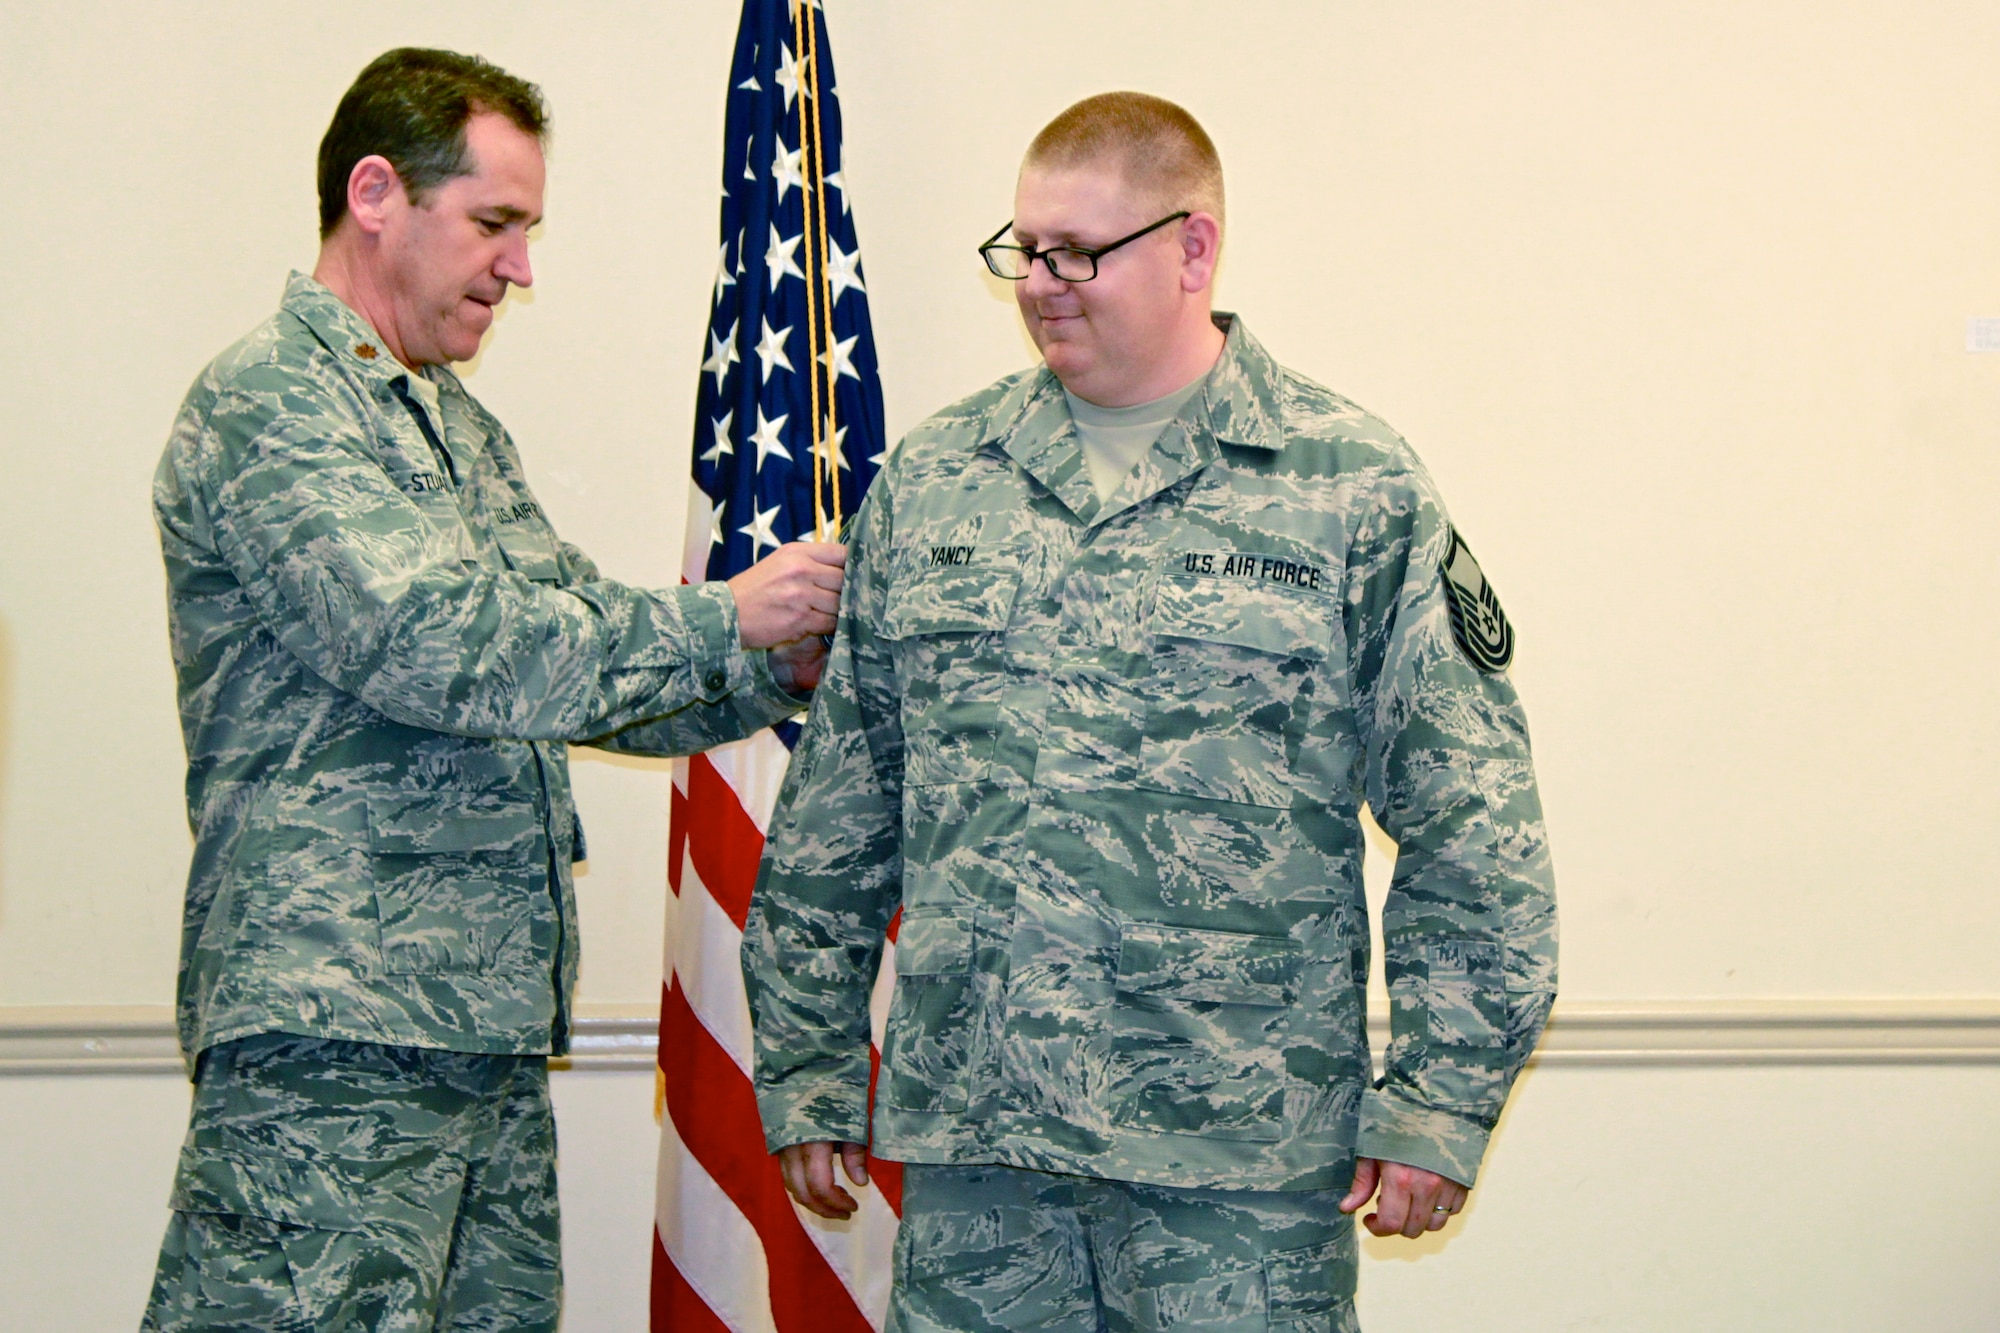 Tech. Sgt. Christopher Yancy, a mission capability technician for the 126th
Supply Chain Management Squadron attached to the 126th Air Refueling Wing,
receives his promotion to the rank of Master Sgt. from Maj. Doug Stuart, the
Public Affairs Officer for the 126th Air Refueling Wing, while temporarily
assigned to Joint Base Pearl Harbor-Hickam, Hawaii, April 15, 2014. Yancy
was at Joint Base Pearl Harbor-Hickam, Hawaii as part of a training exercise
with other members from the 126th Air Refueling Wing. The 126th Air
Refueling Wing is attached to the Illinois Air National Guard, based out of
Scott Air Force Base, Ill. (Courtesy photo) 